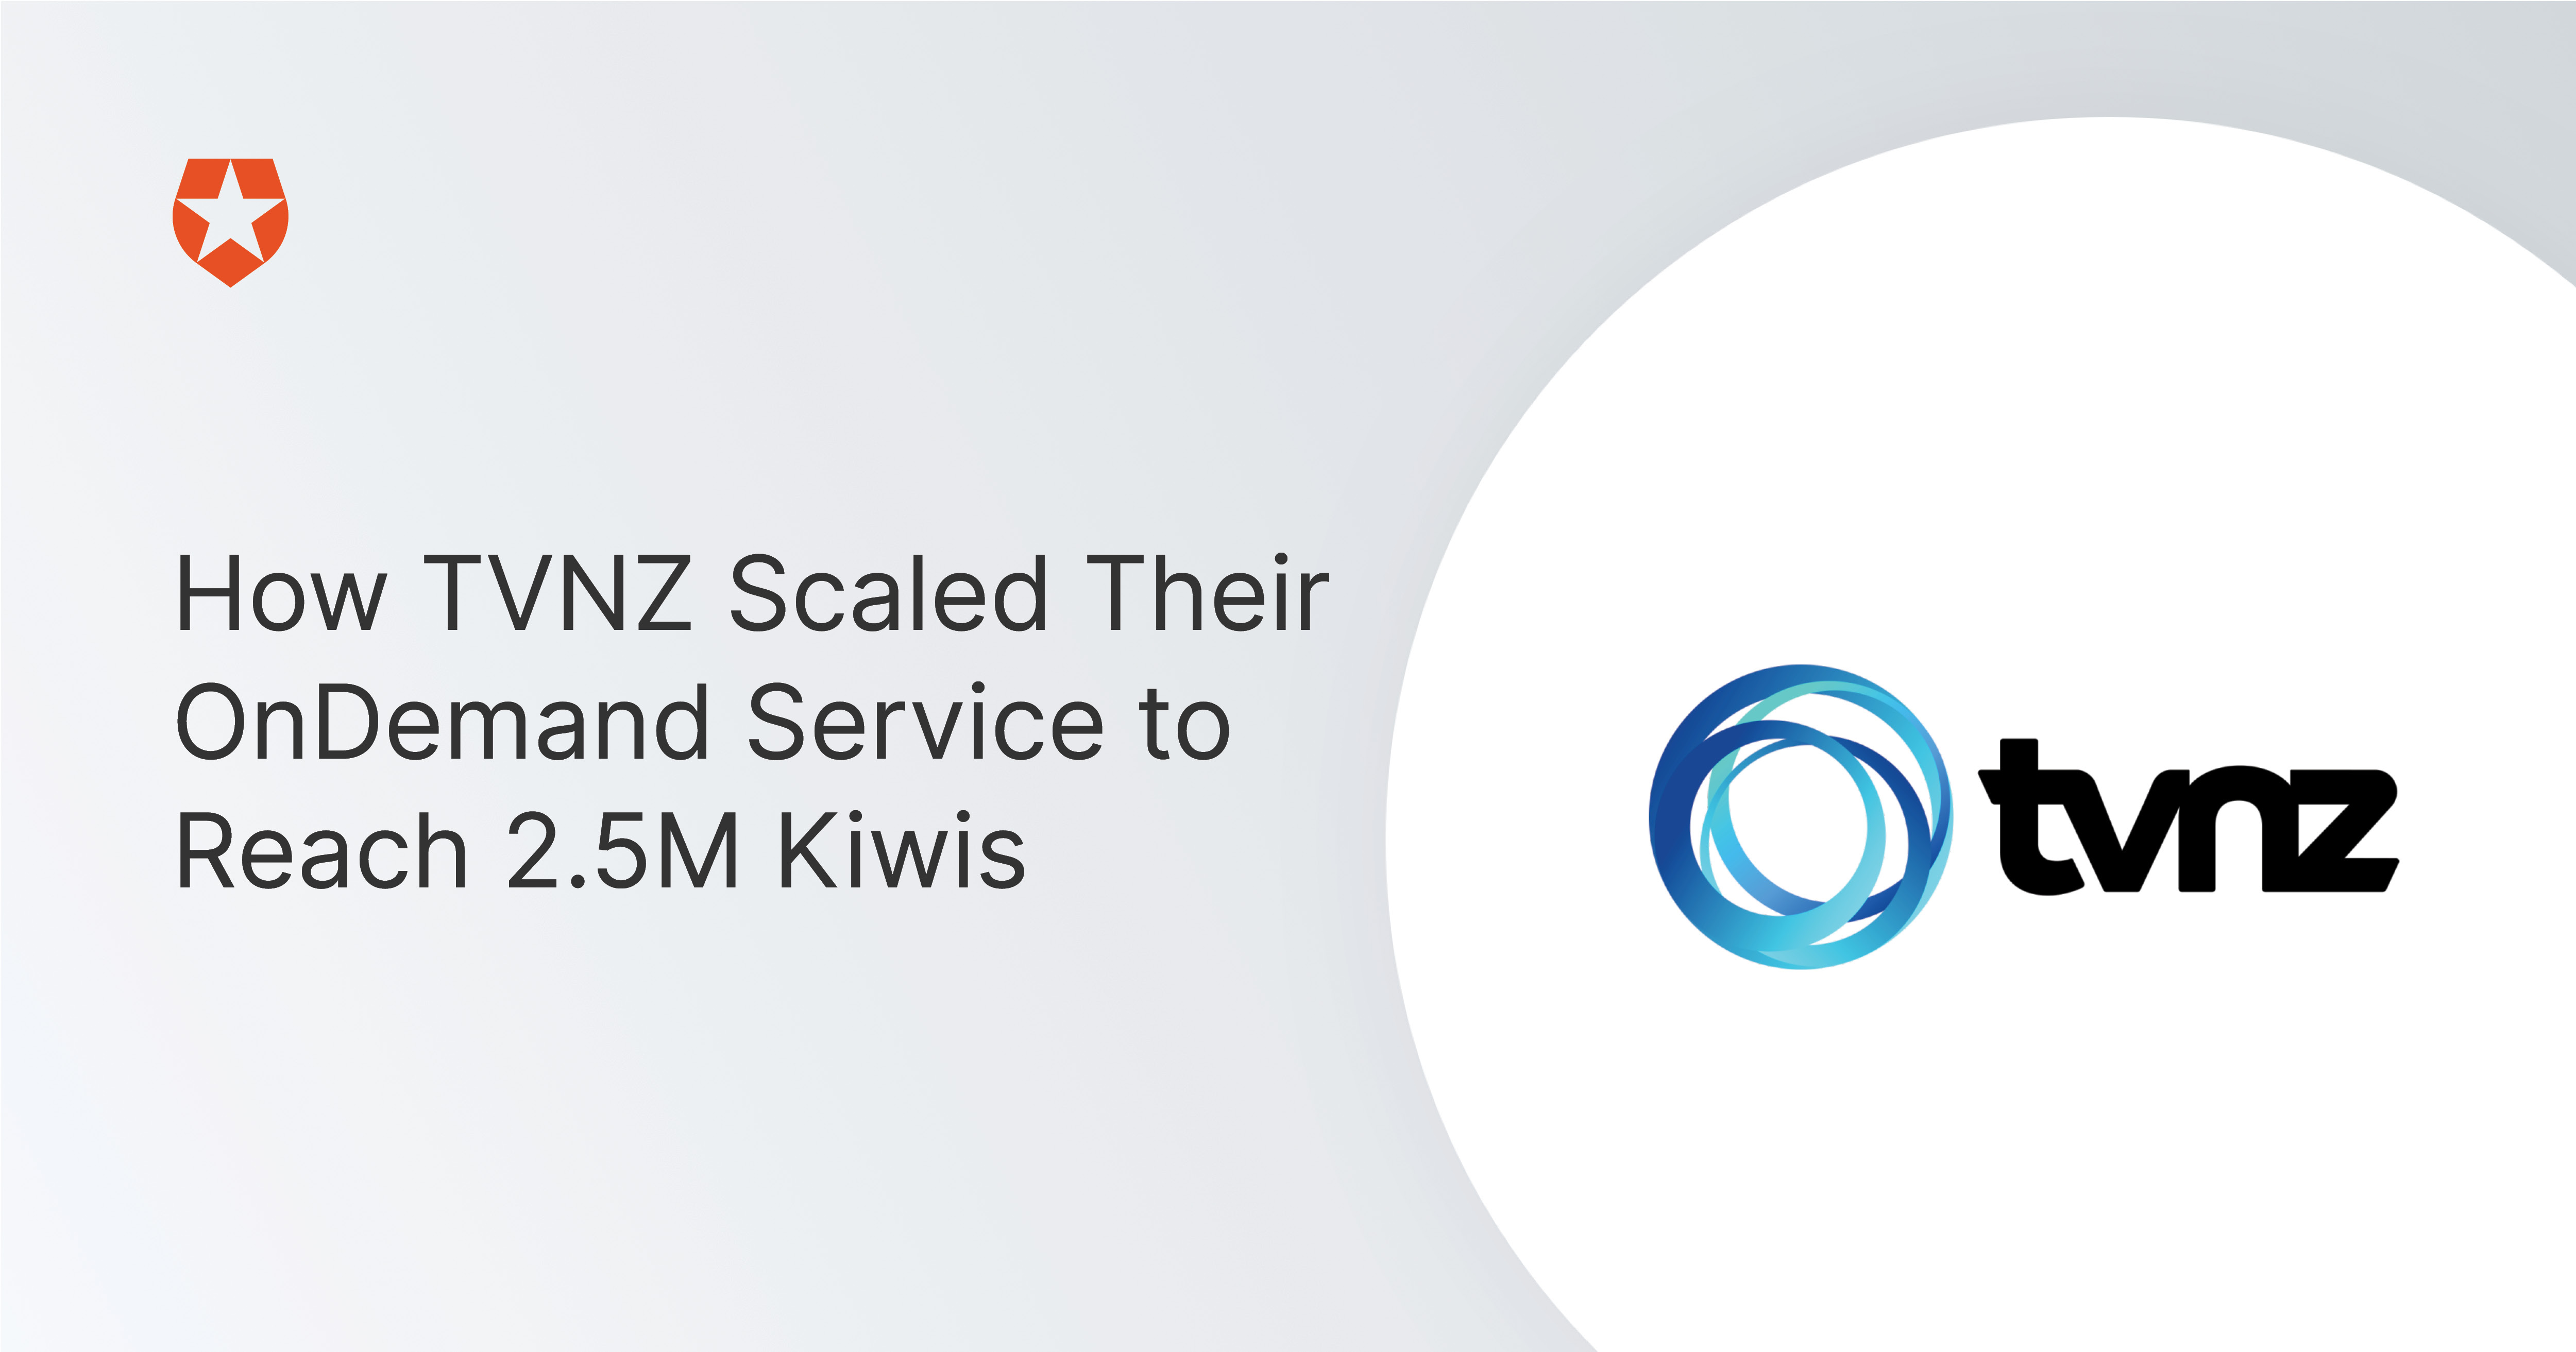 How TVNZ Scaled Their OnDemand Service to Reach 2.5M Kiwis